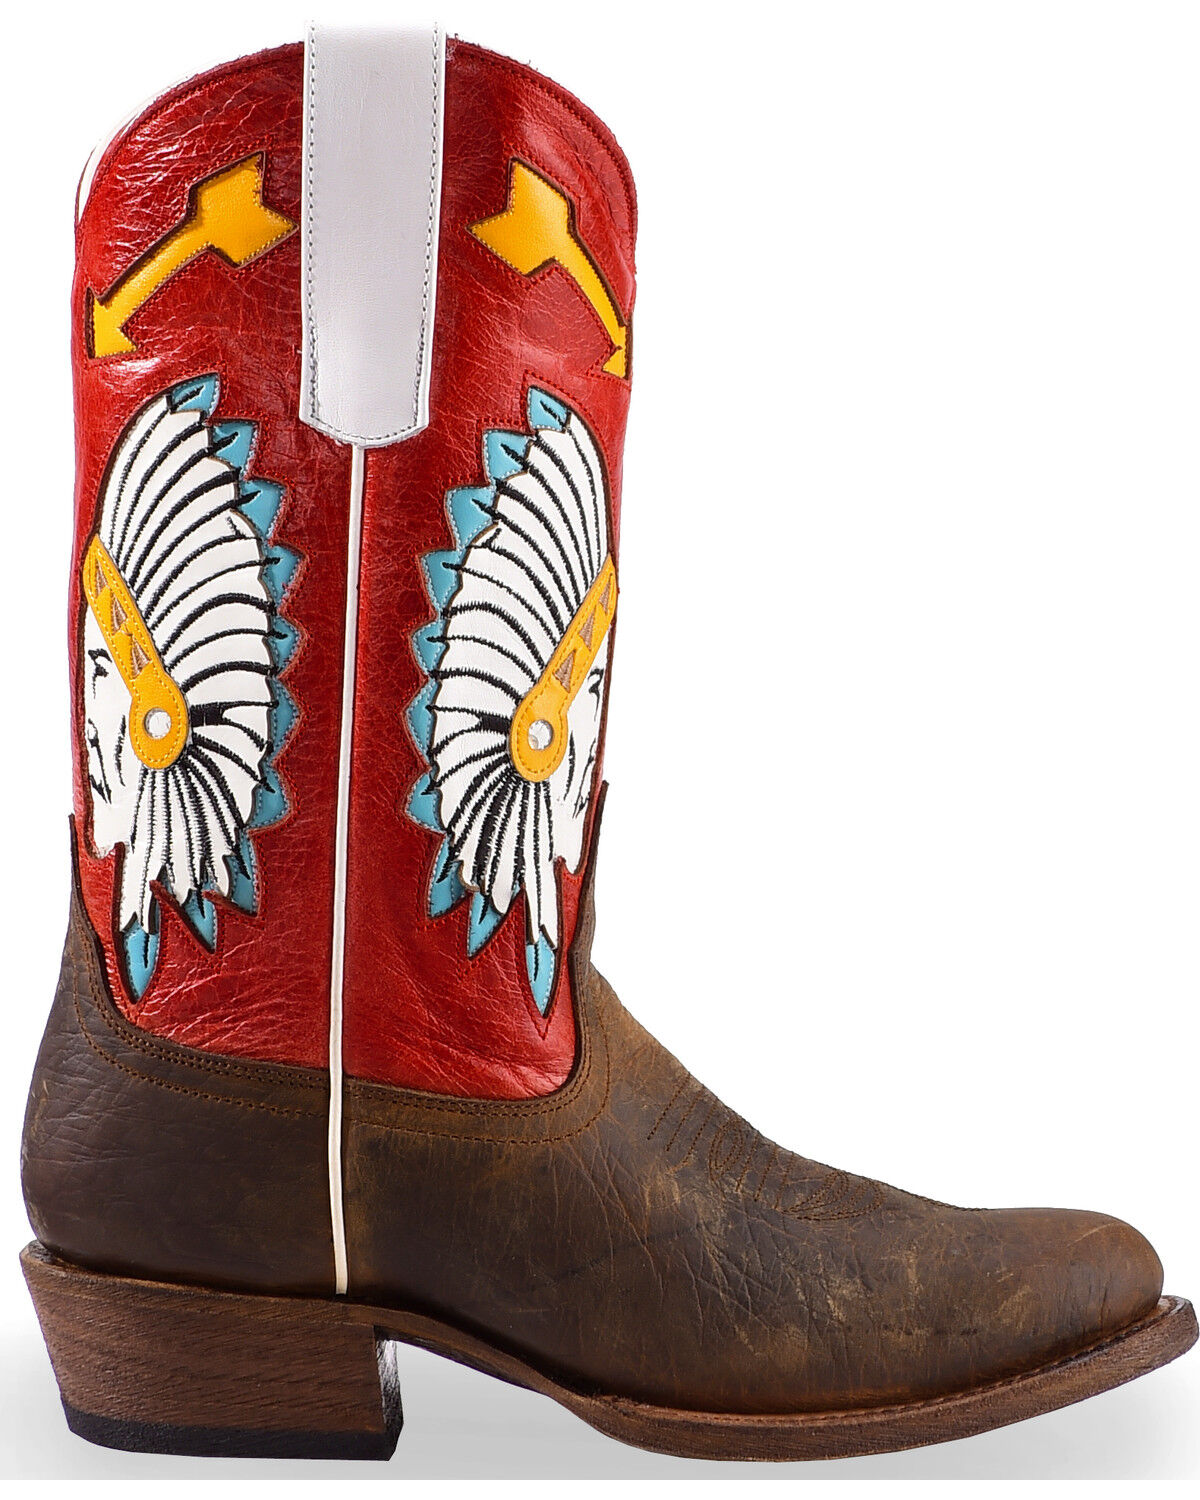 Macie Bean Youth Girls' Rodeo Red 